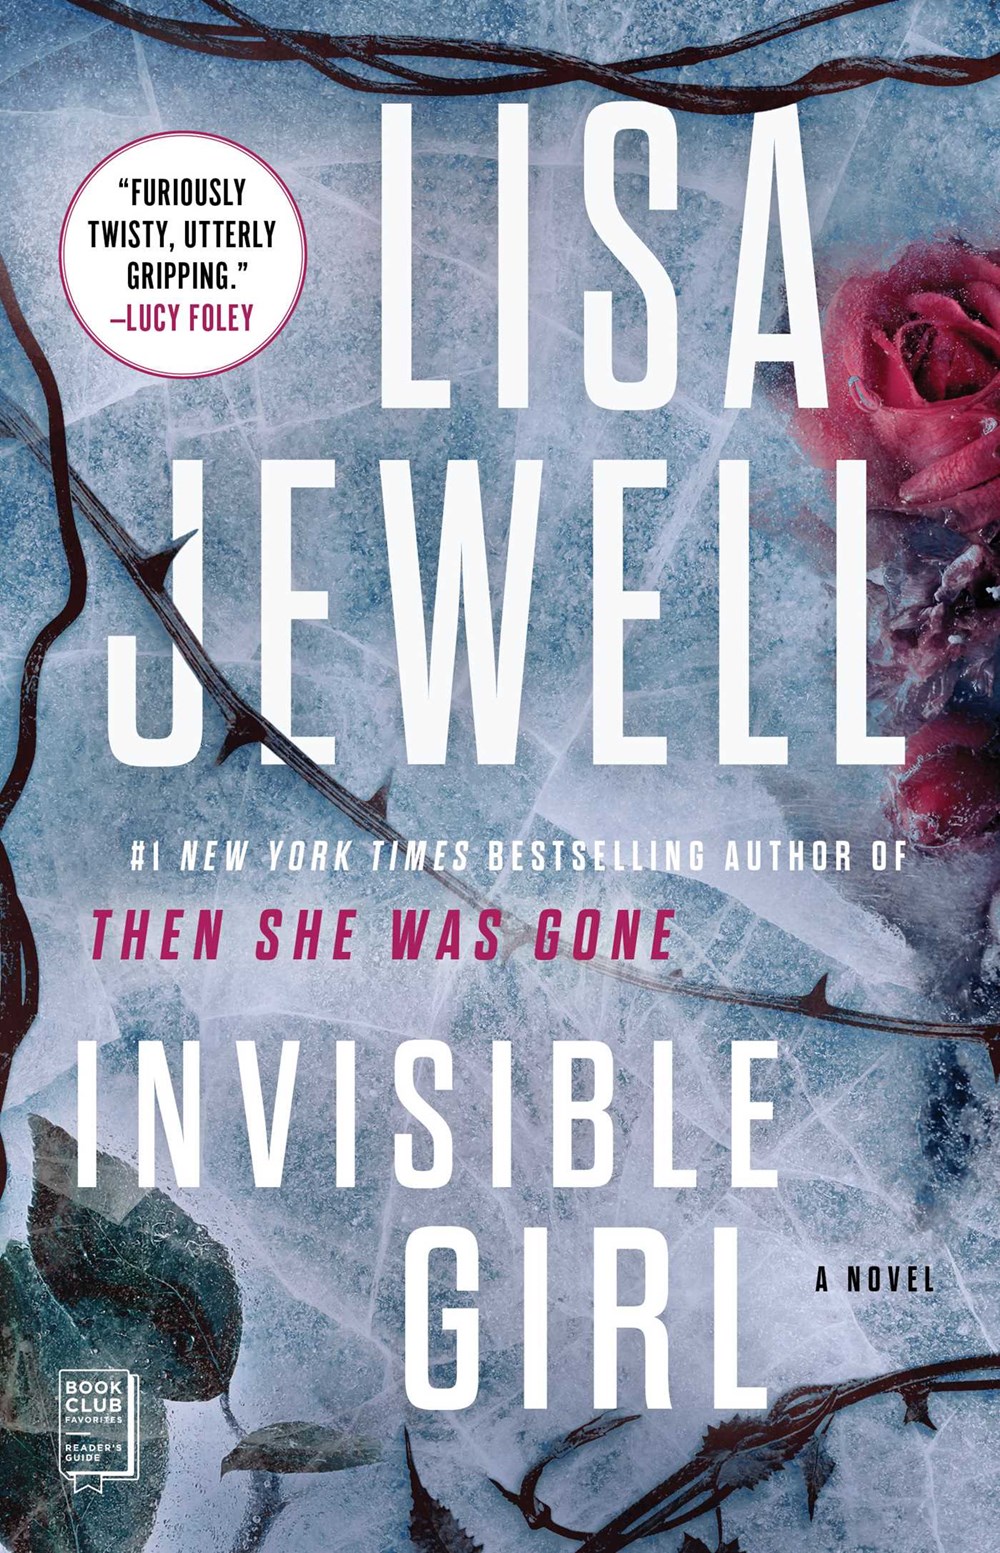 Invisible Girl cover image